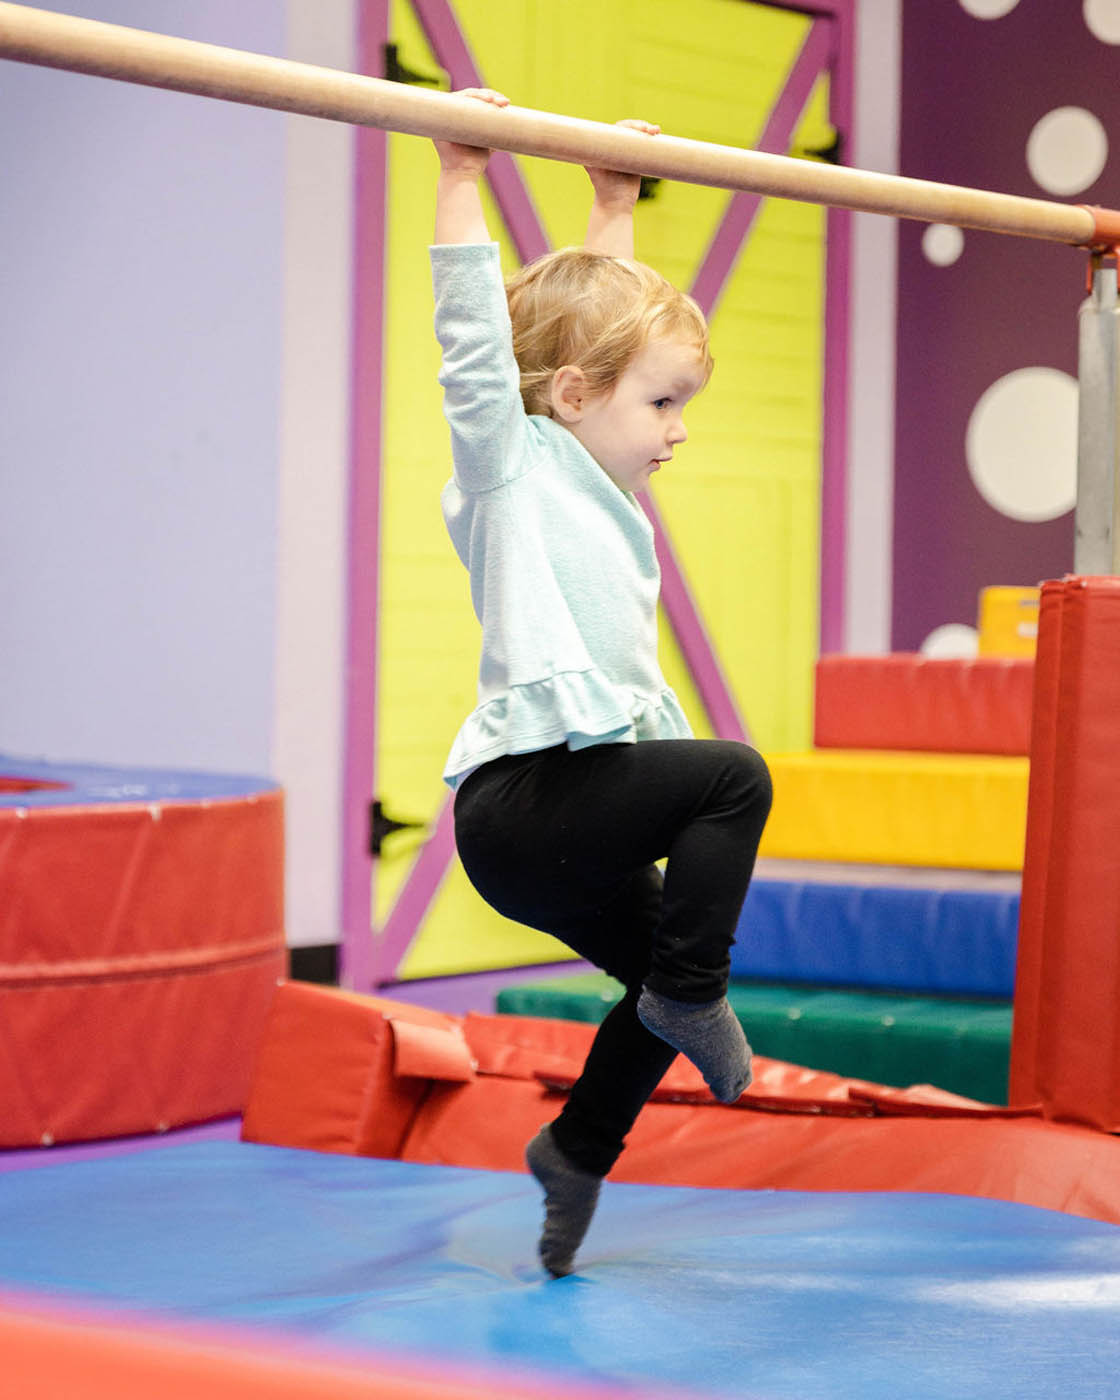 A kid swining from Romp n' Roll gym equipment - safe kids fitness classes in Wethersfield, CT.